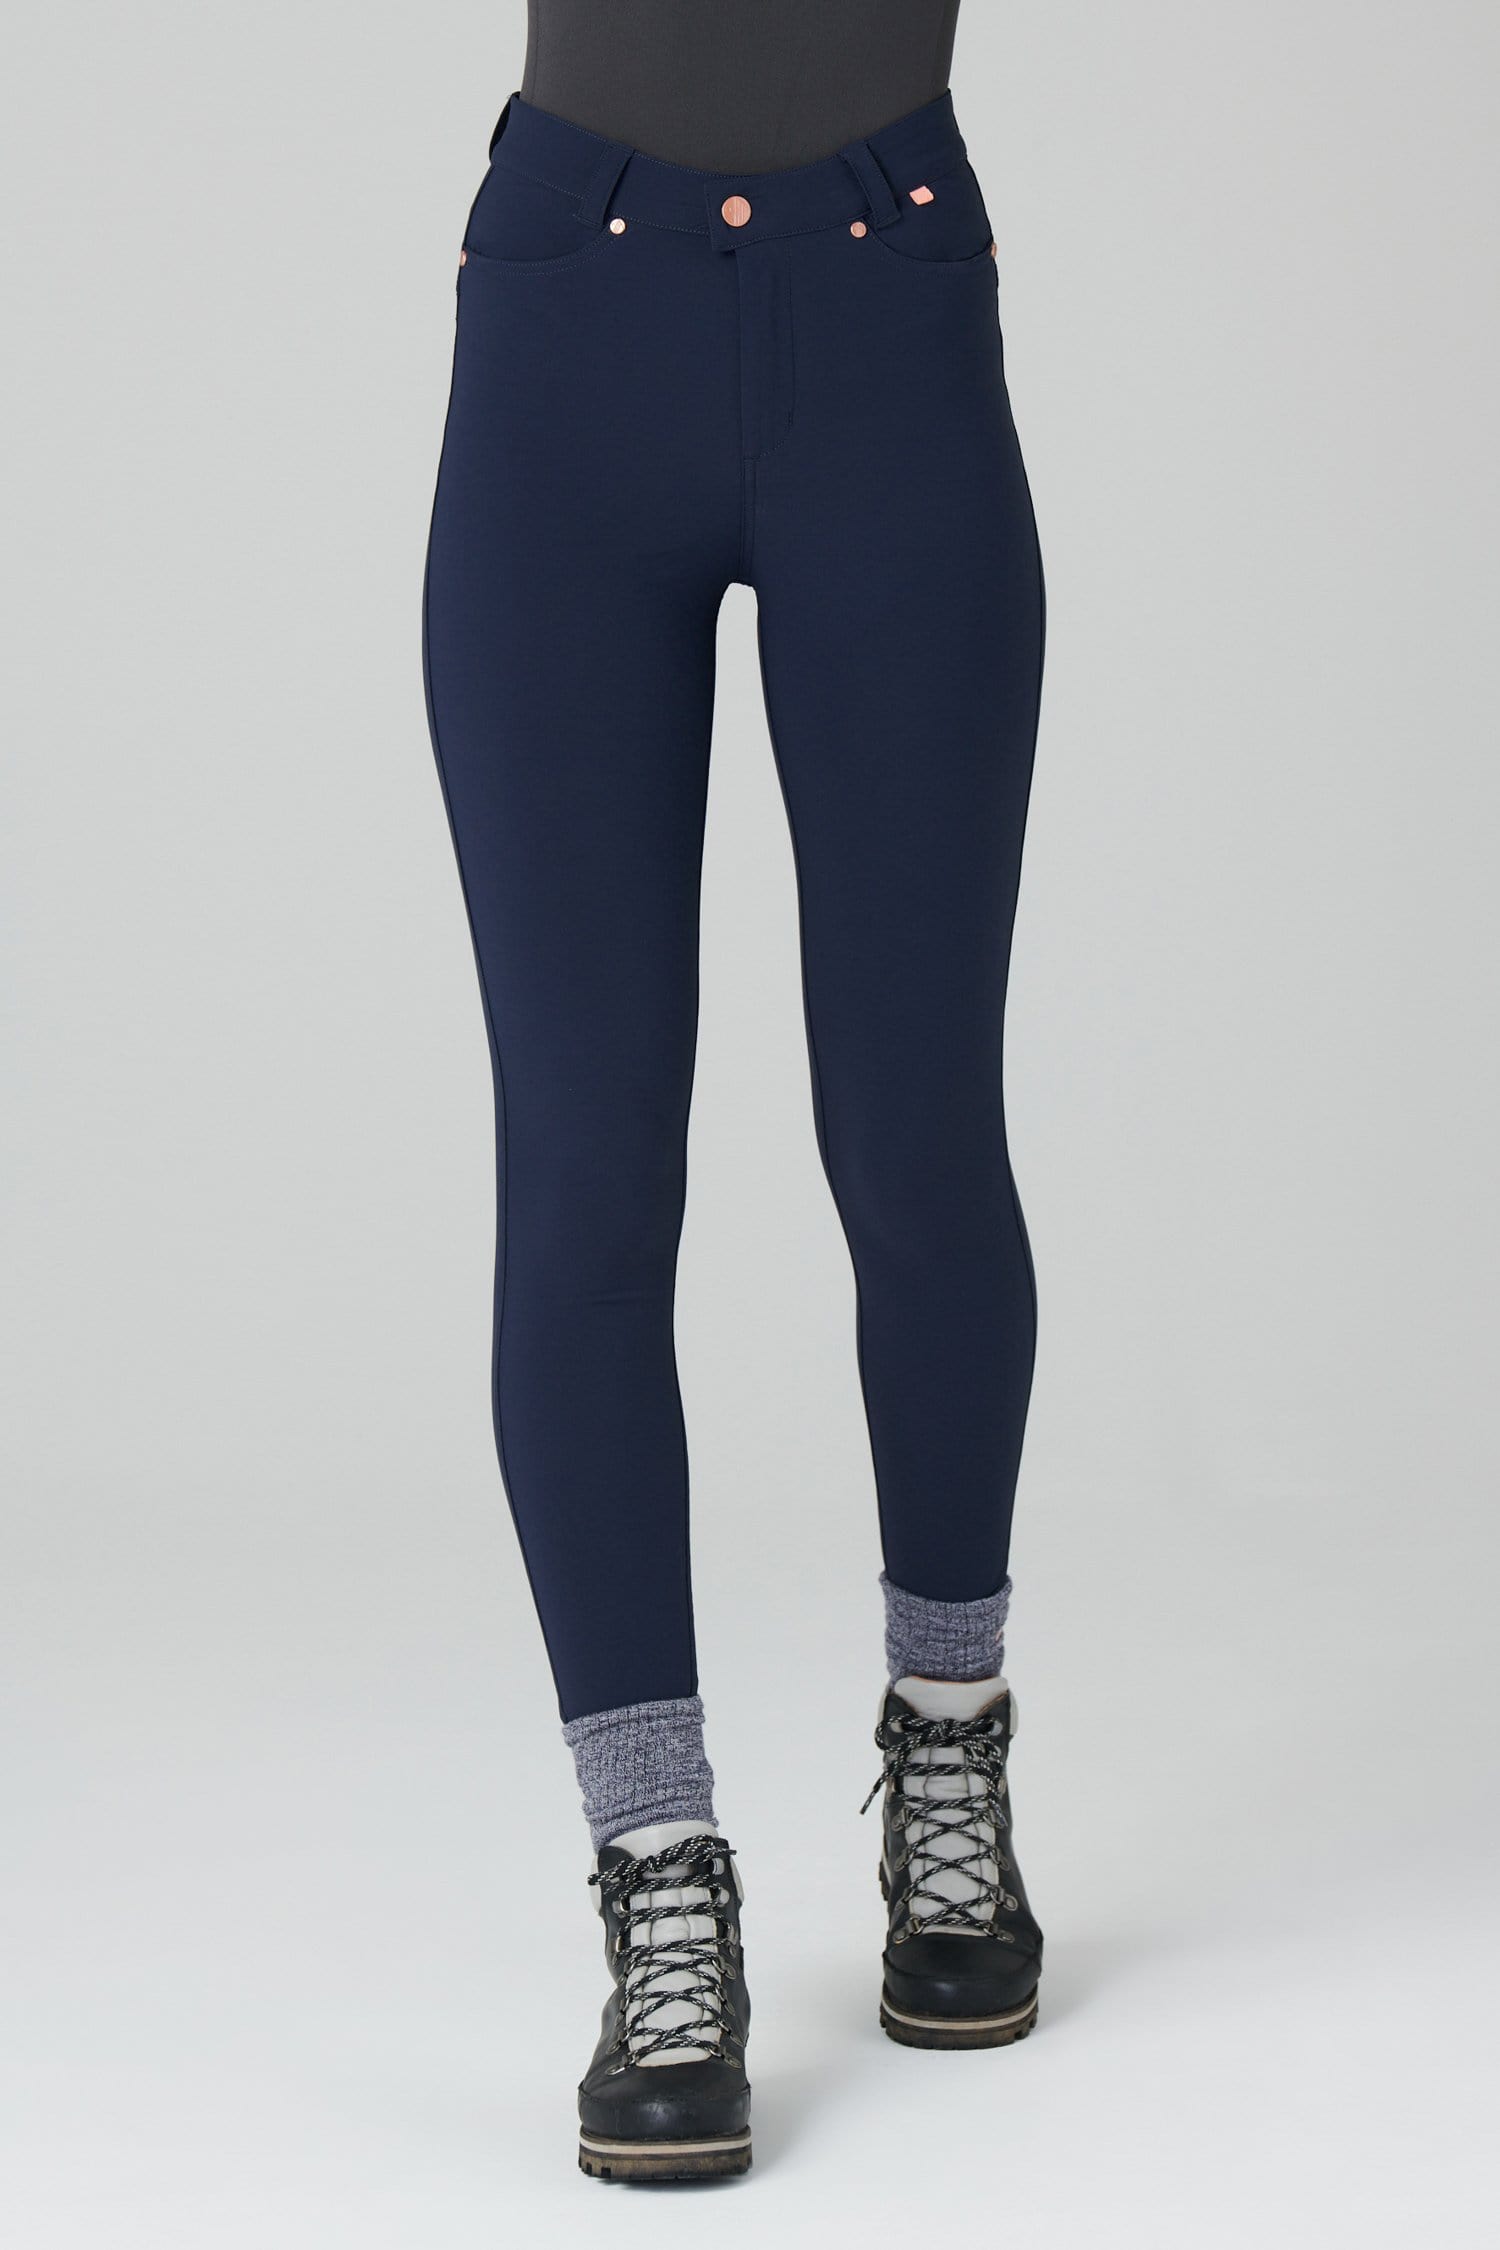 Max Stretch Skinny Outdoor Trousers - Deep Navy - 38l / Uk20 - Womens - Acai Outdoorwear